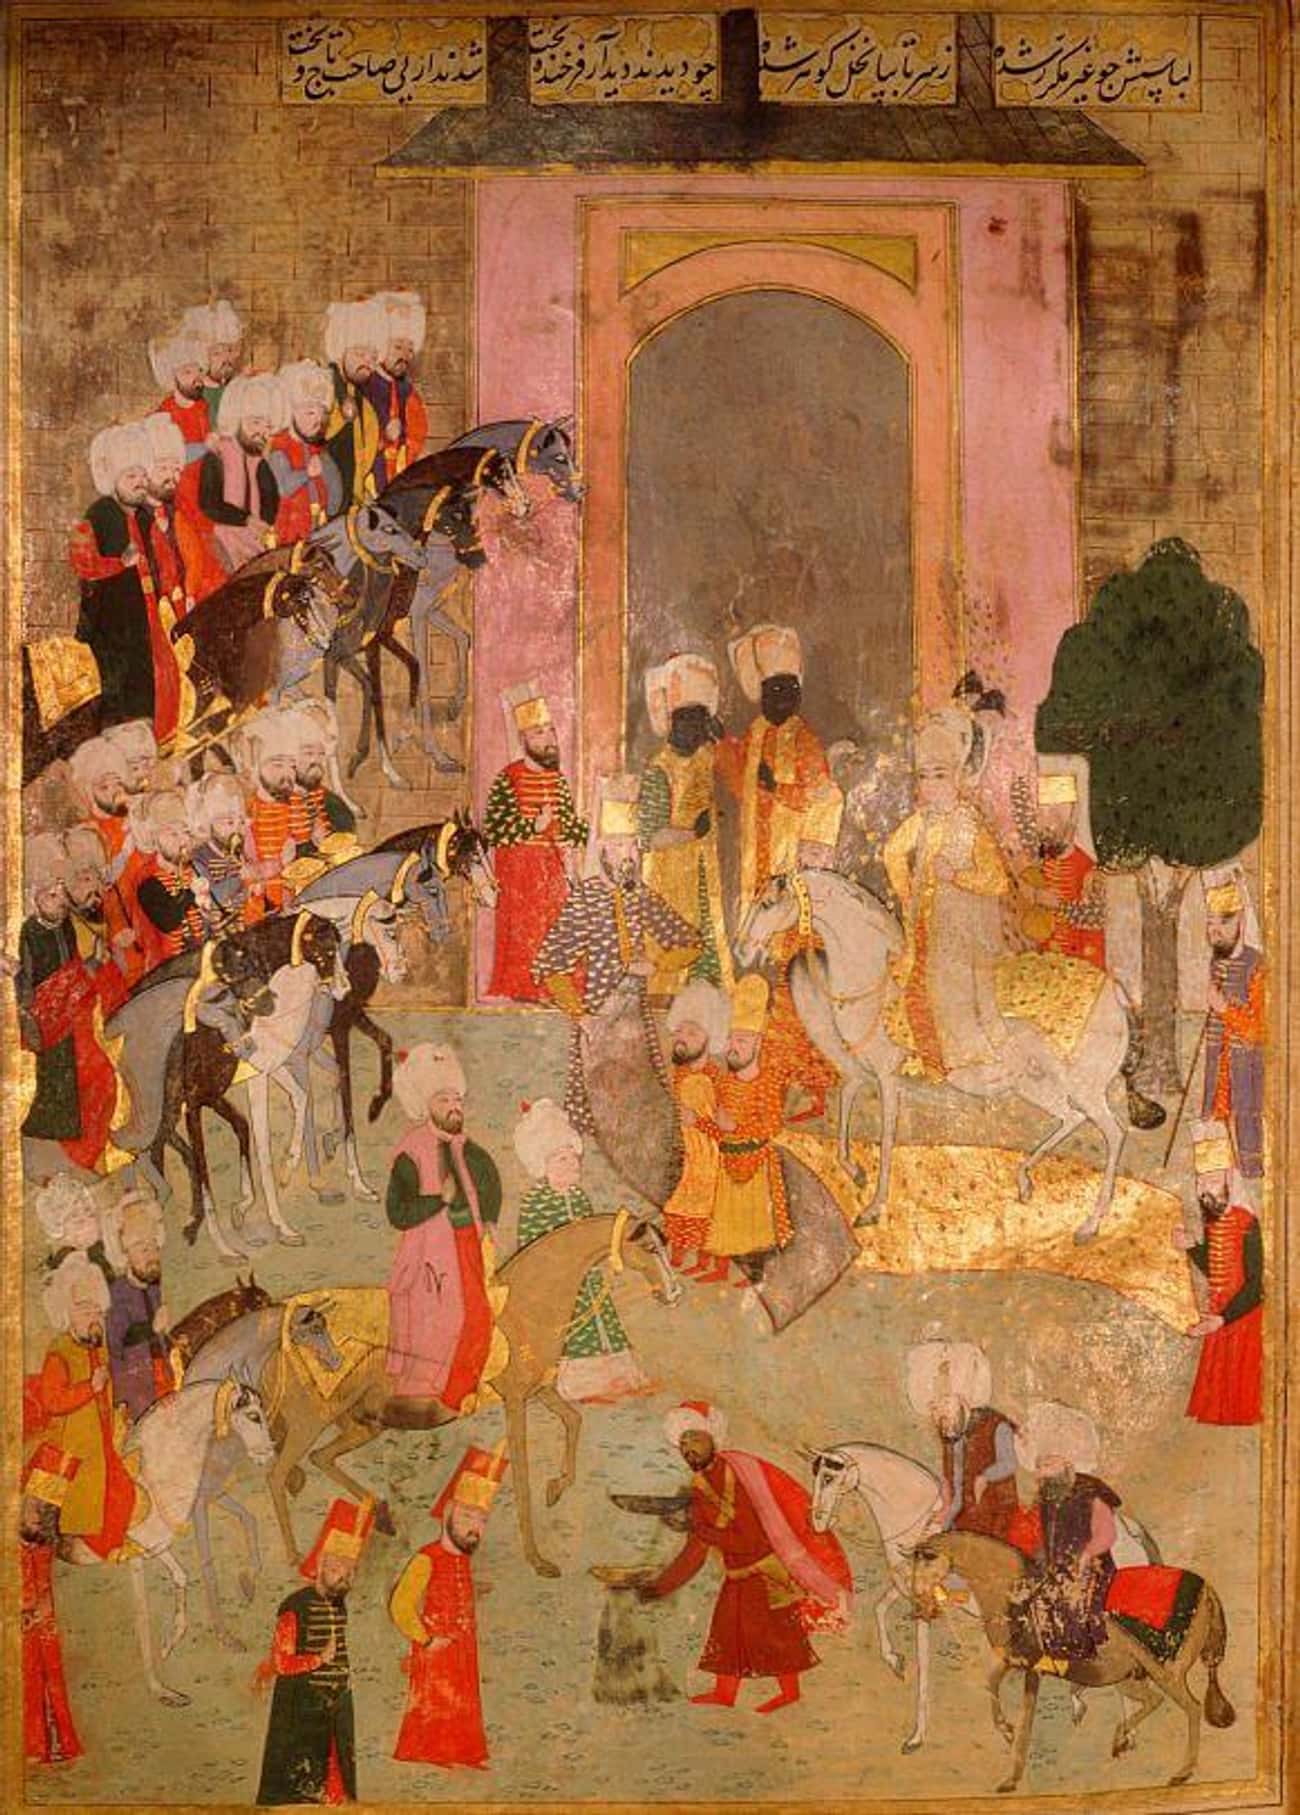 Ottoman Ruler Mehmed III Killed 19 Of His Brothers And Stepbrothers, And Was Within His Legal Rights